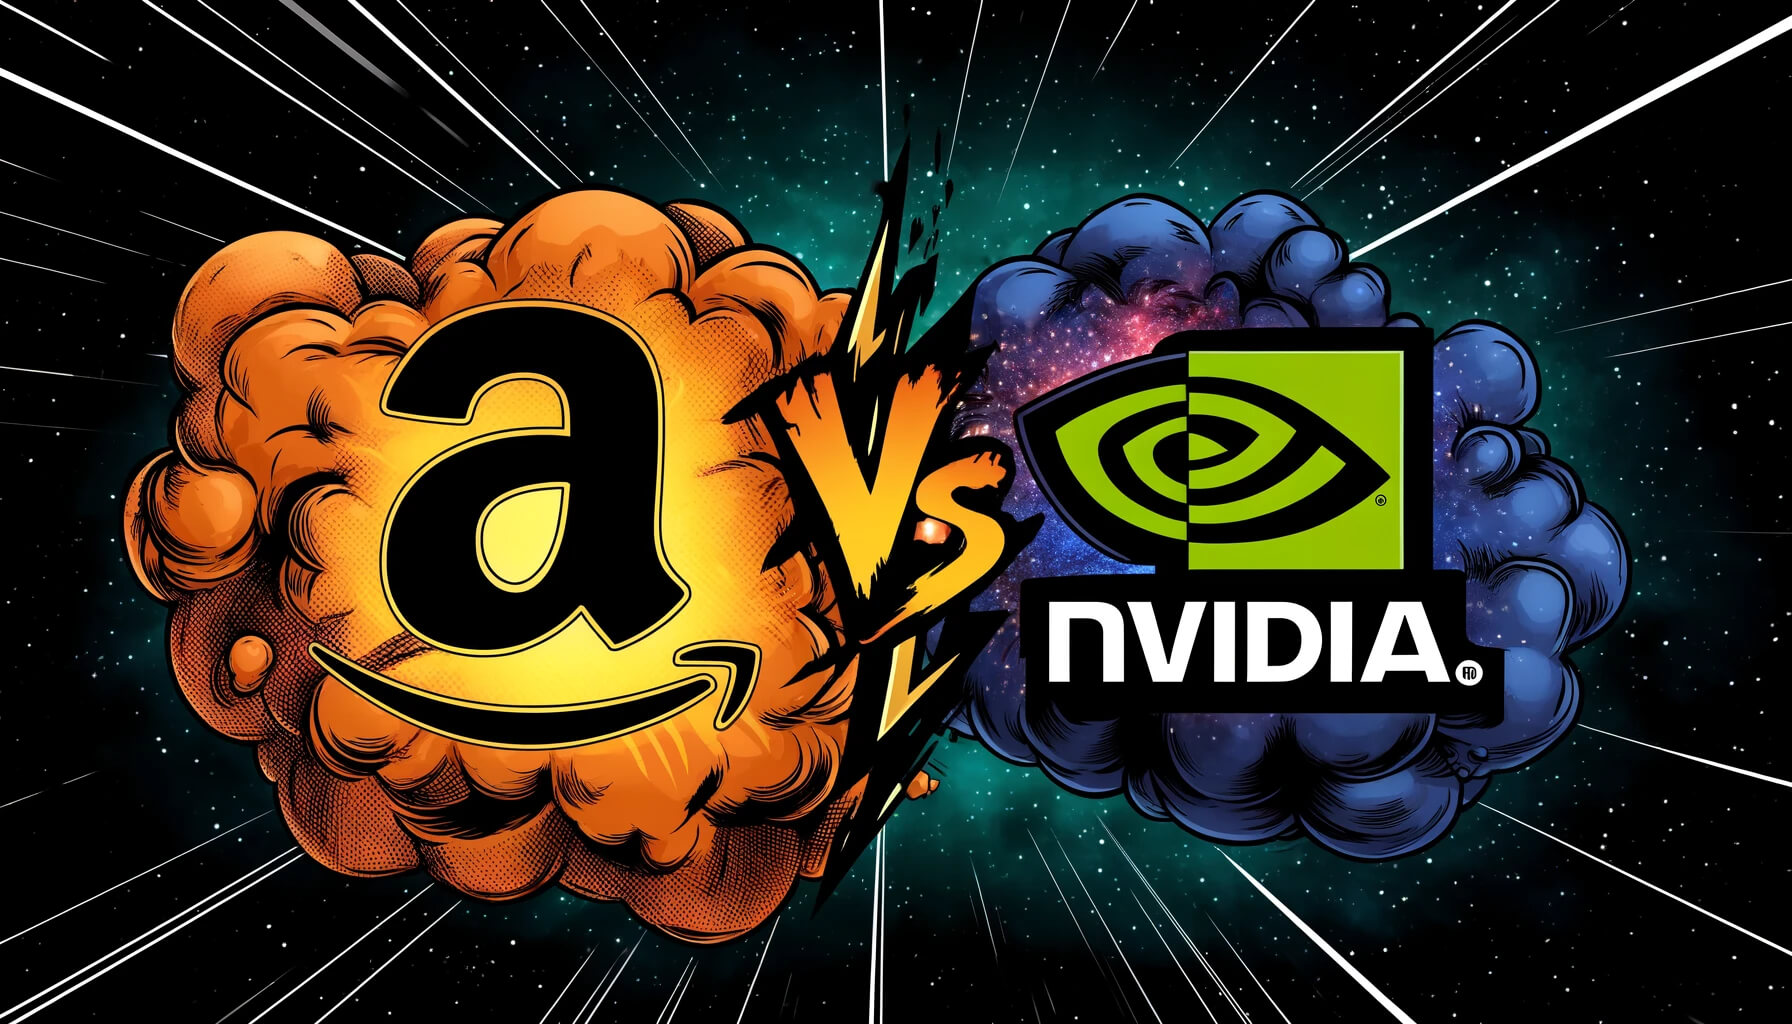 Comparing Giants: Amazon and Nvidia's Financial Strengths